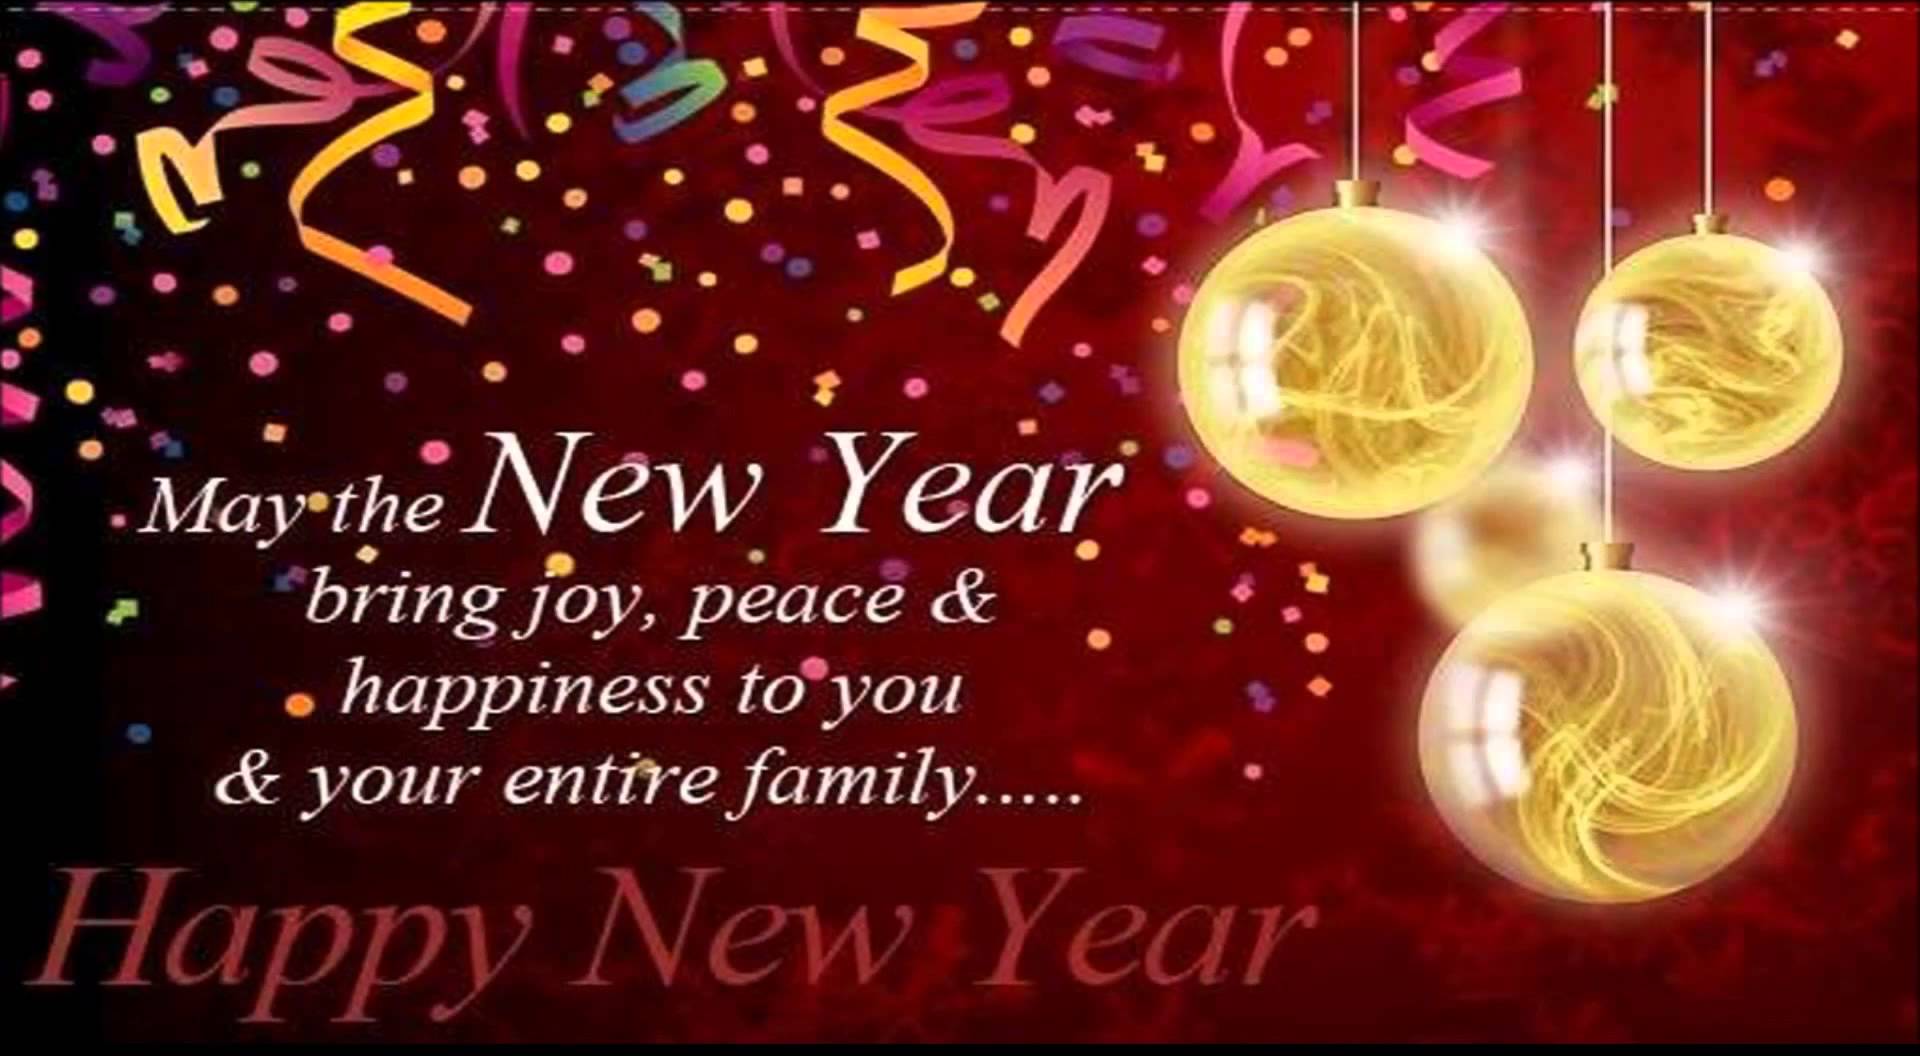 New Year 2021 Greetings Images